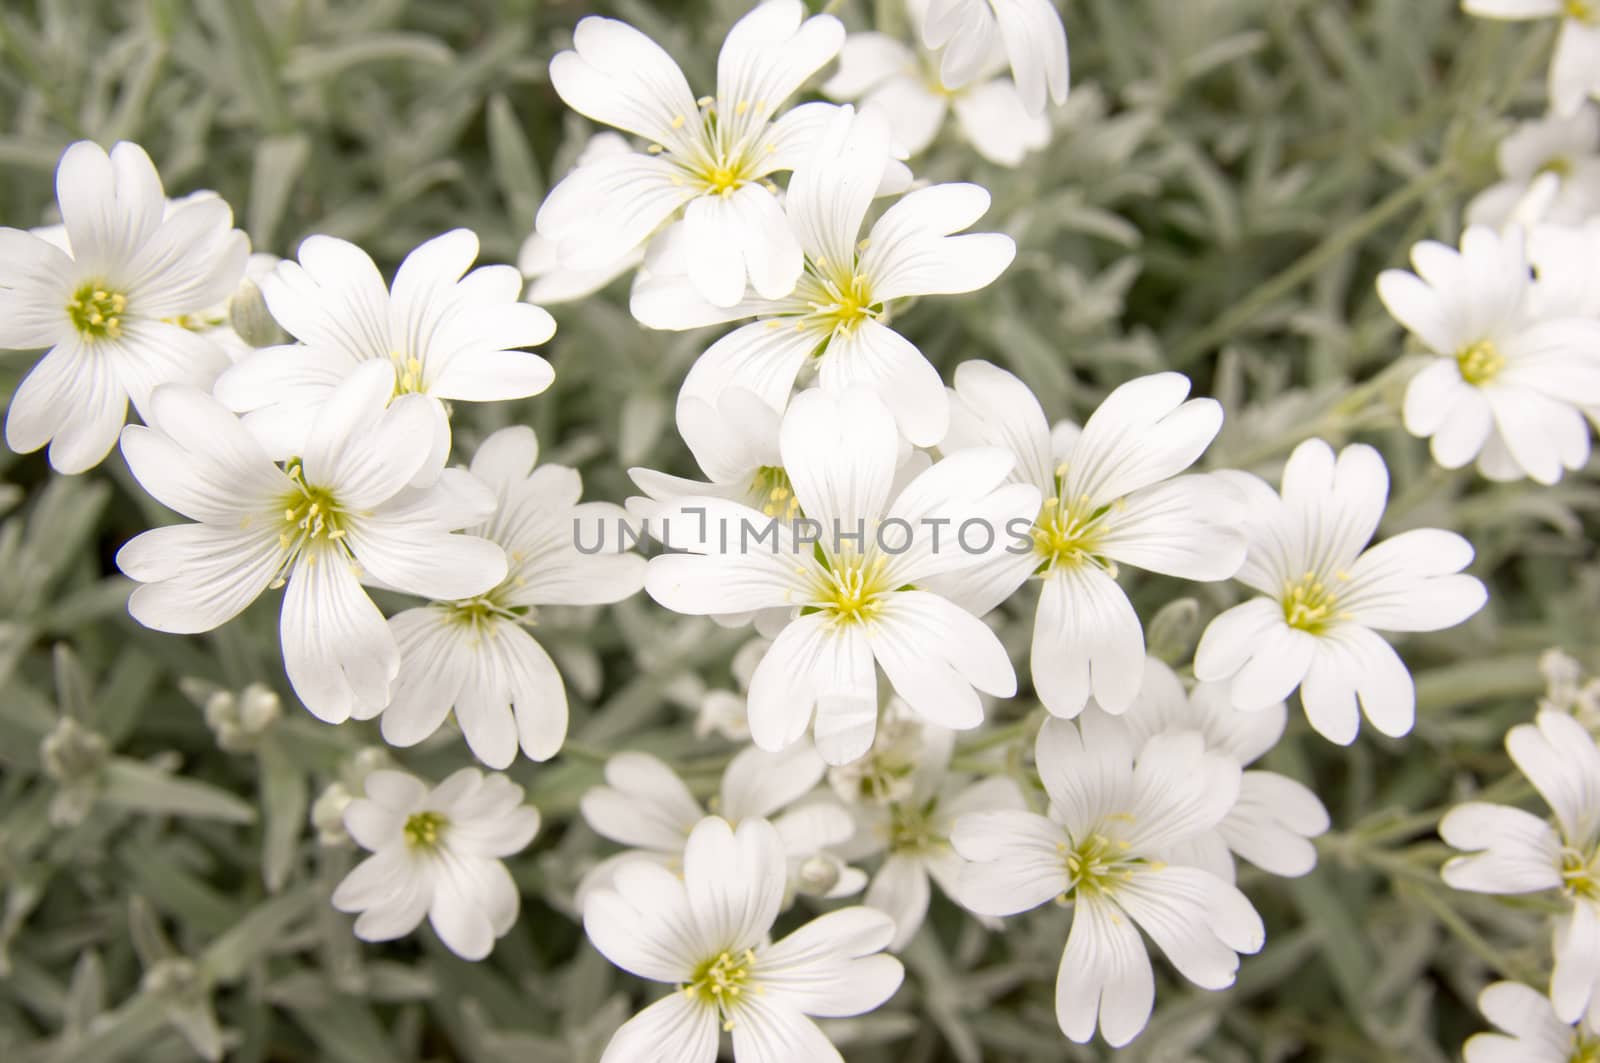 white flowers with yellow stamens,on a spring lawn.